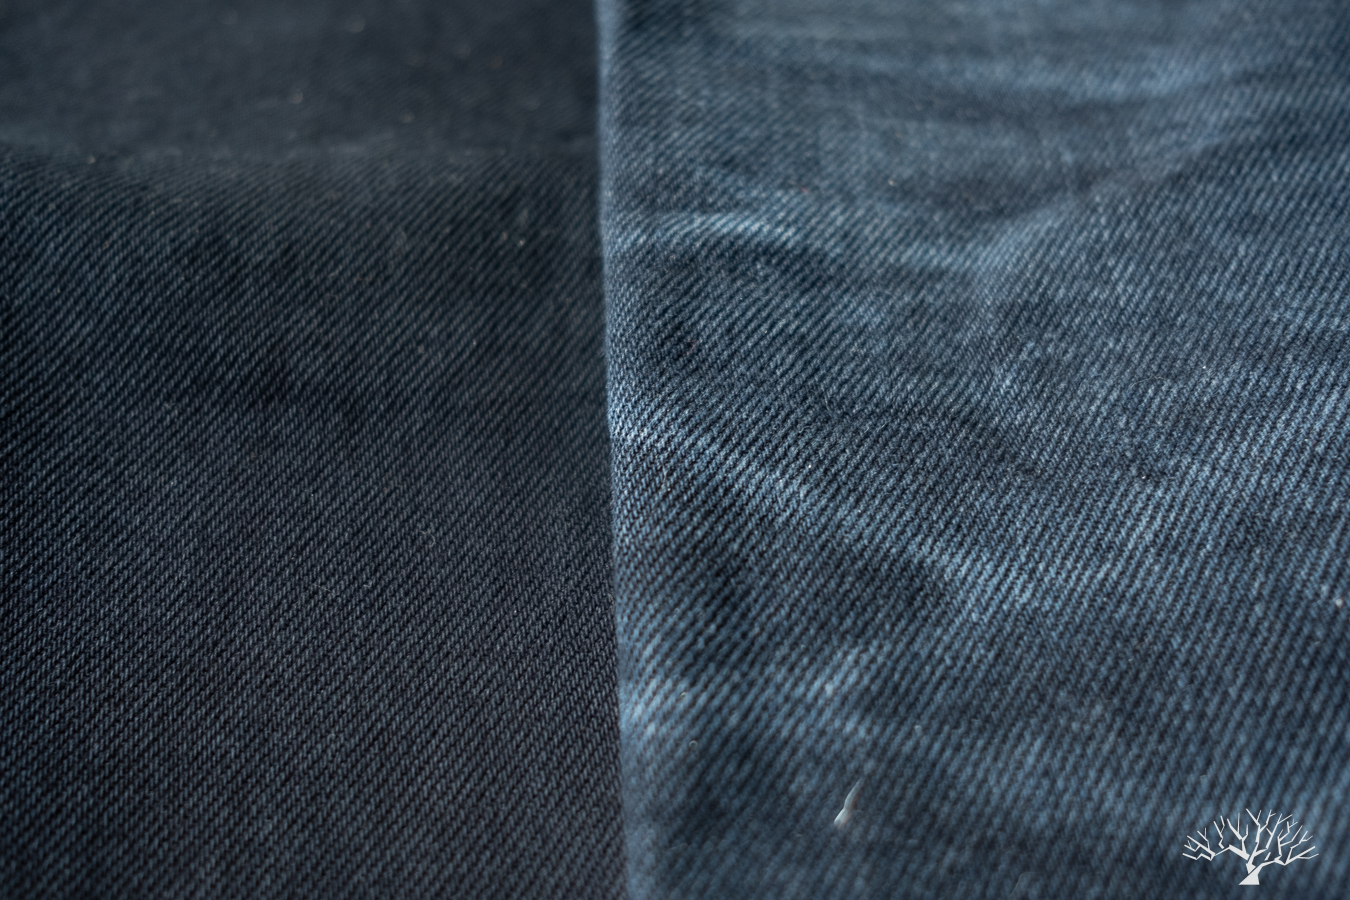 Iron Heart 21oz overdyed black selvedge denim pair compared to a brand new pair, honeycombs around the back of knees